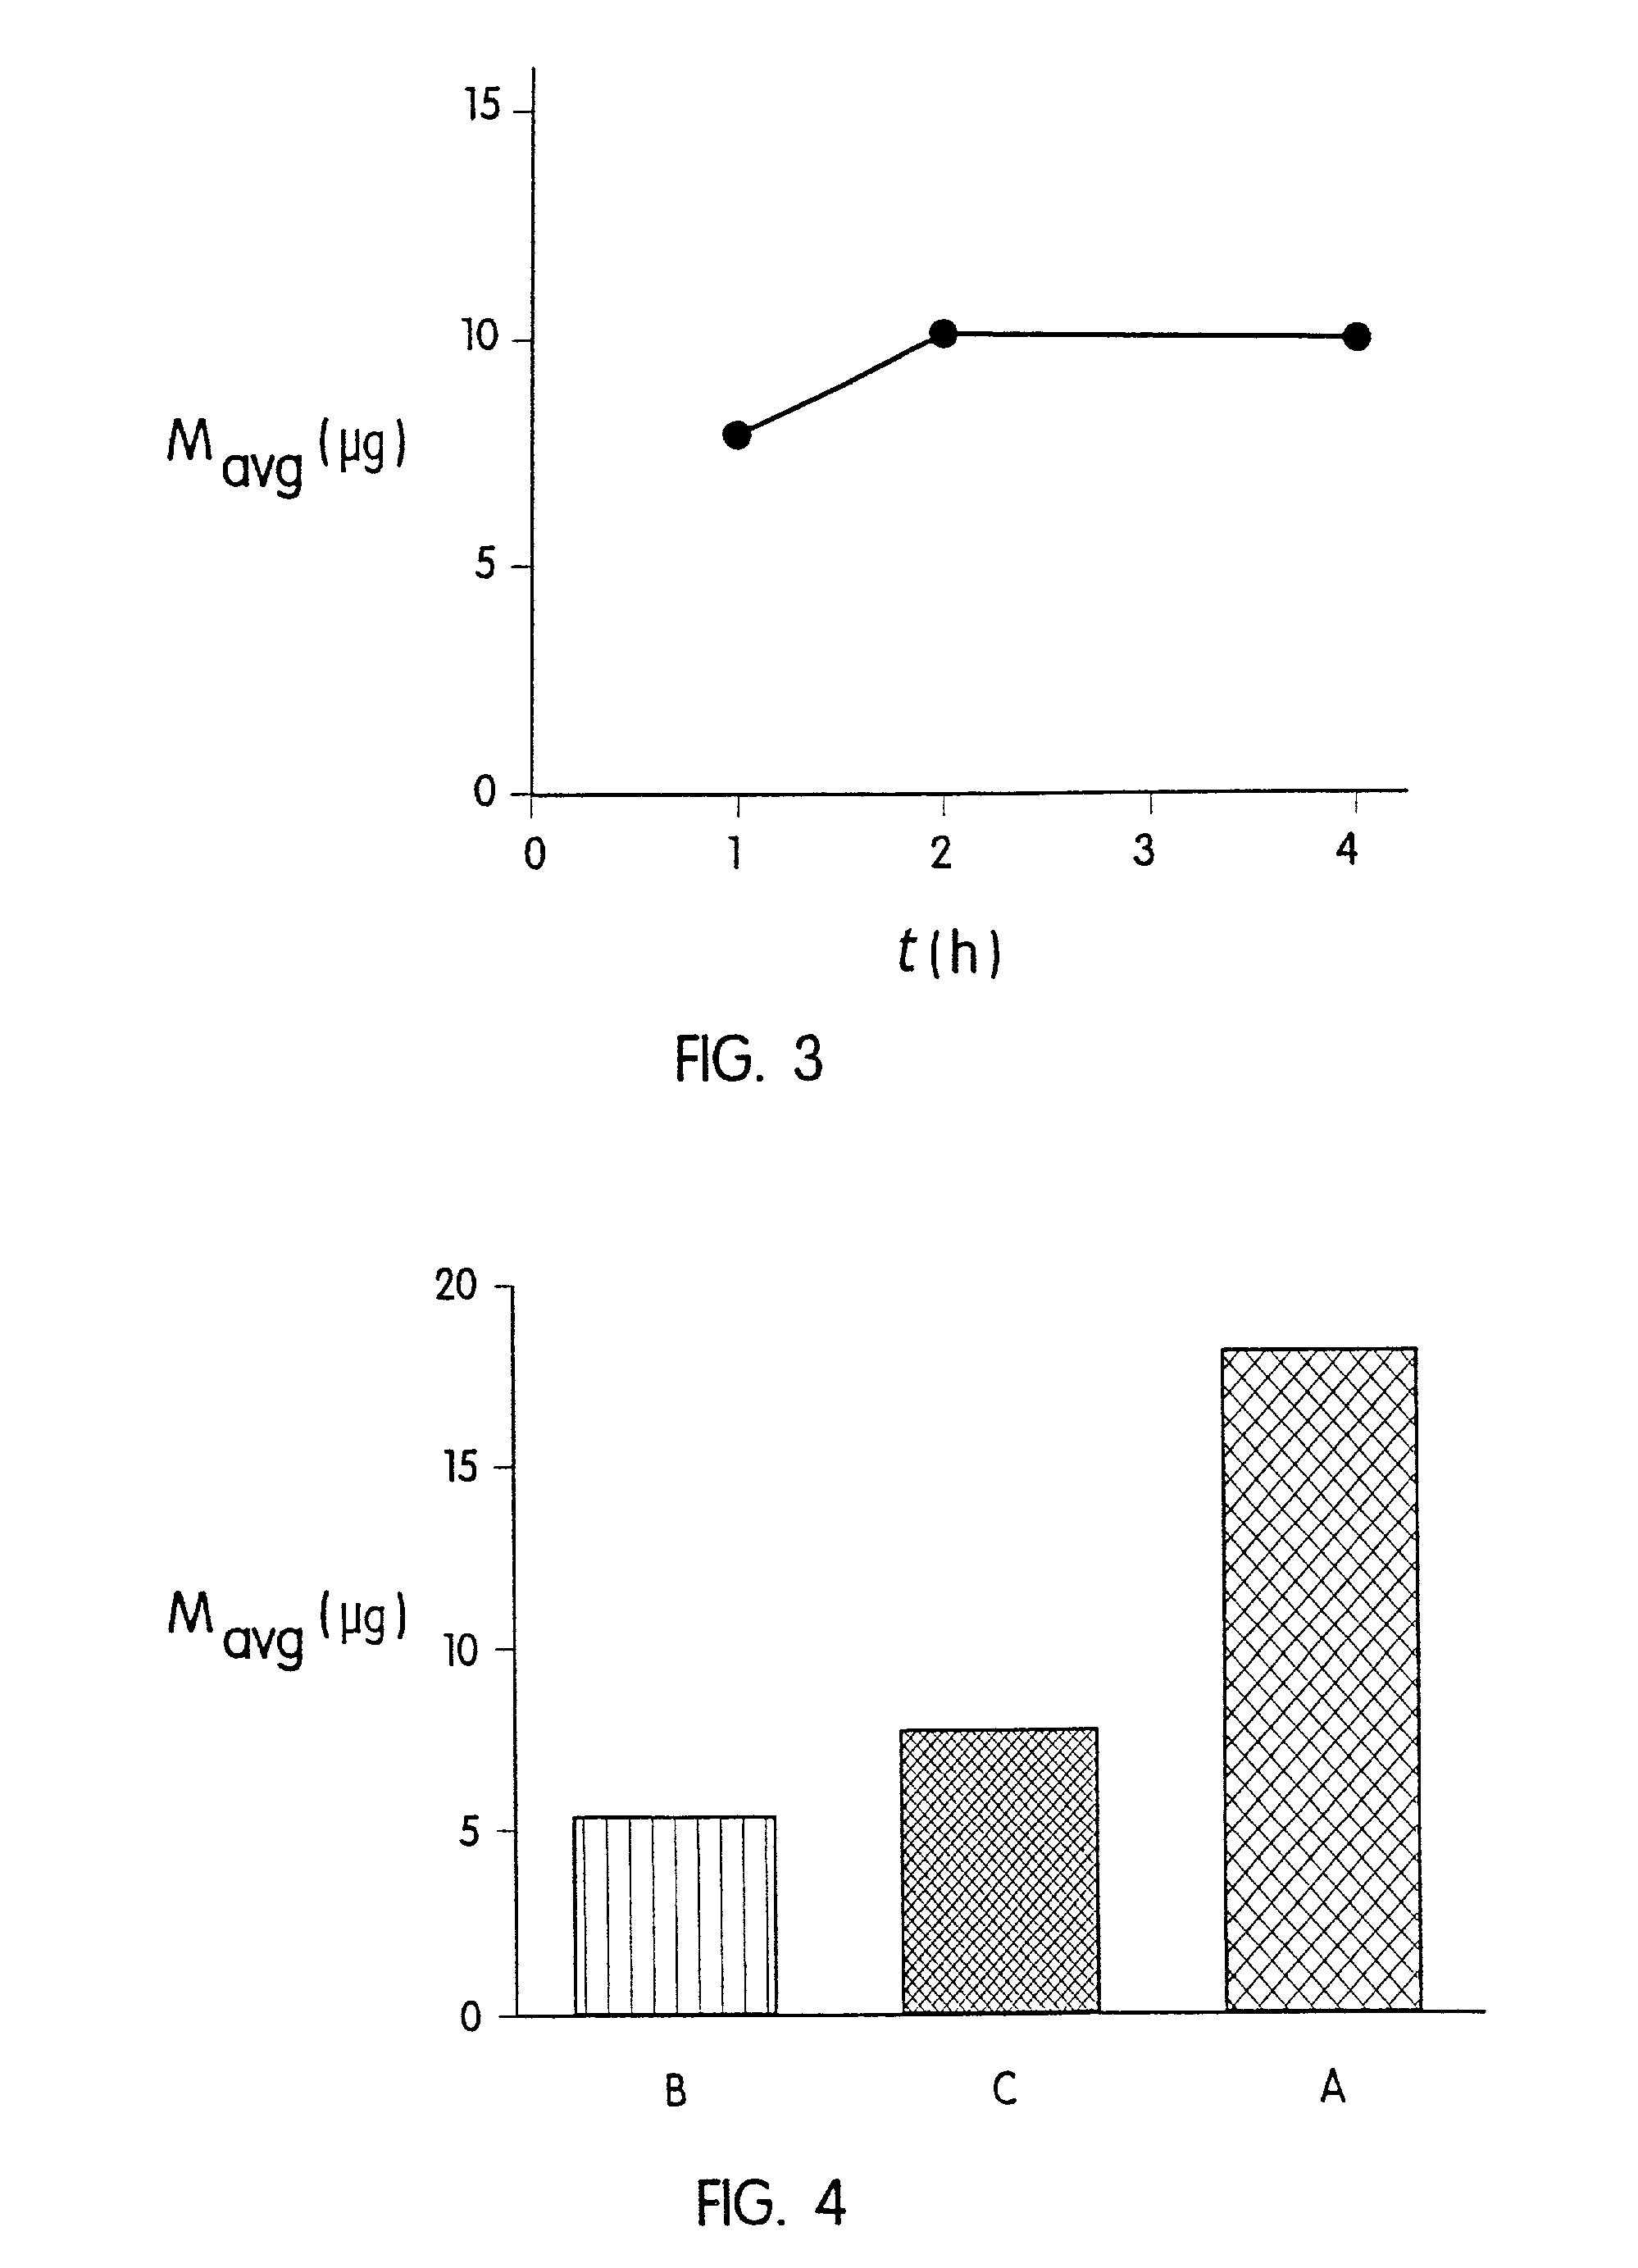 Transdermal drug delivery devices having coated microprotrusions